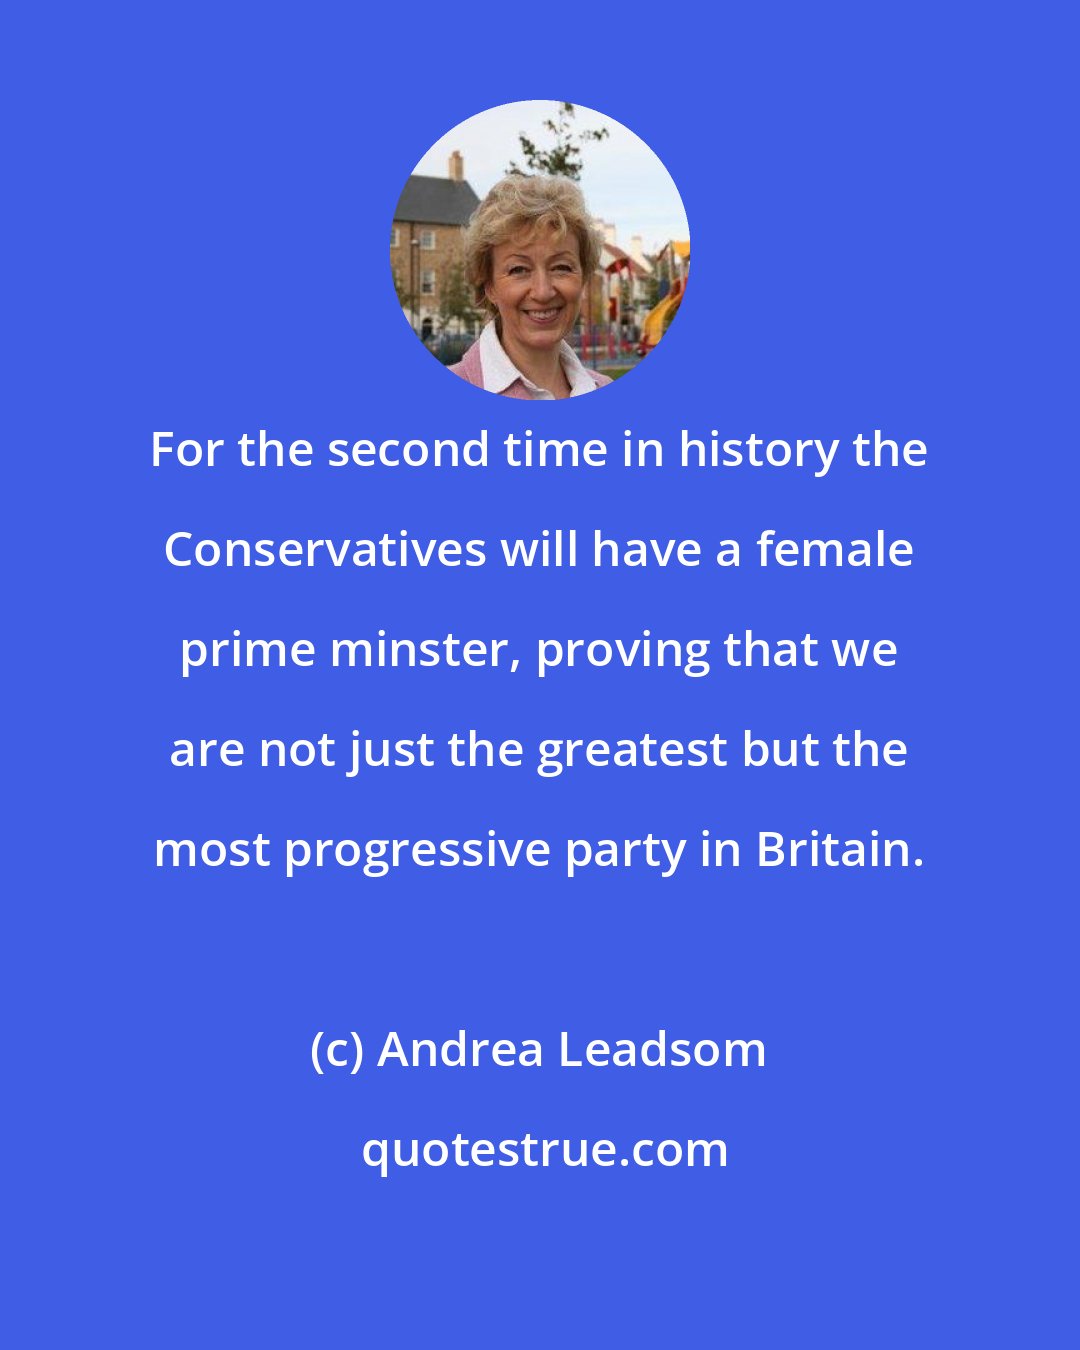 Andrea Leadsom: For the second time in history the Conservatives will have a female prime minster, proving that we are not just the greatest but the most progressive party in Britain.